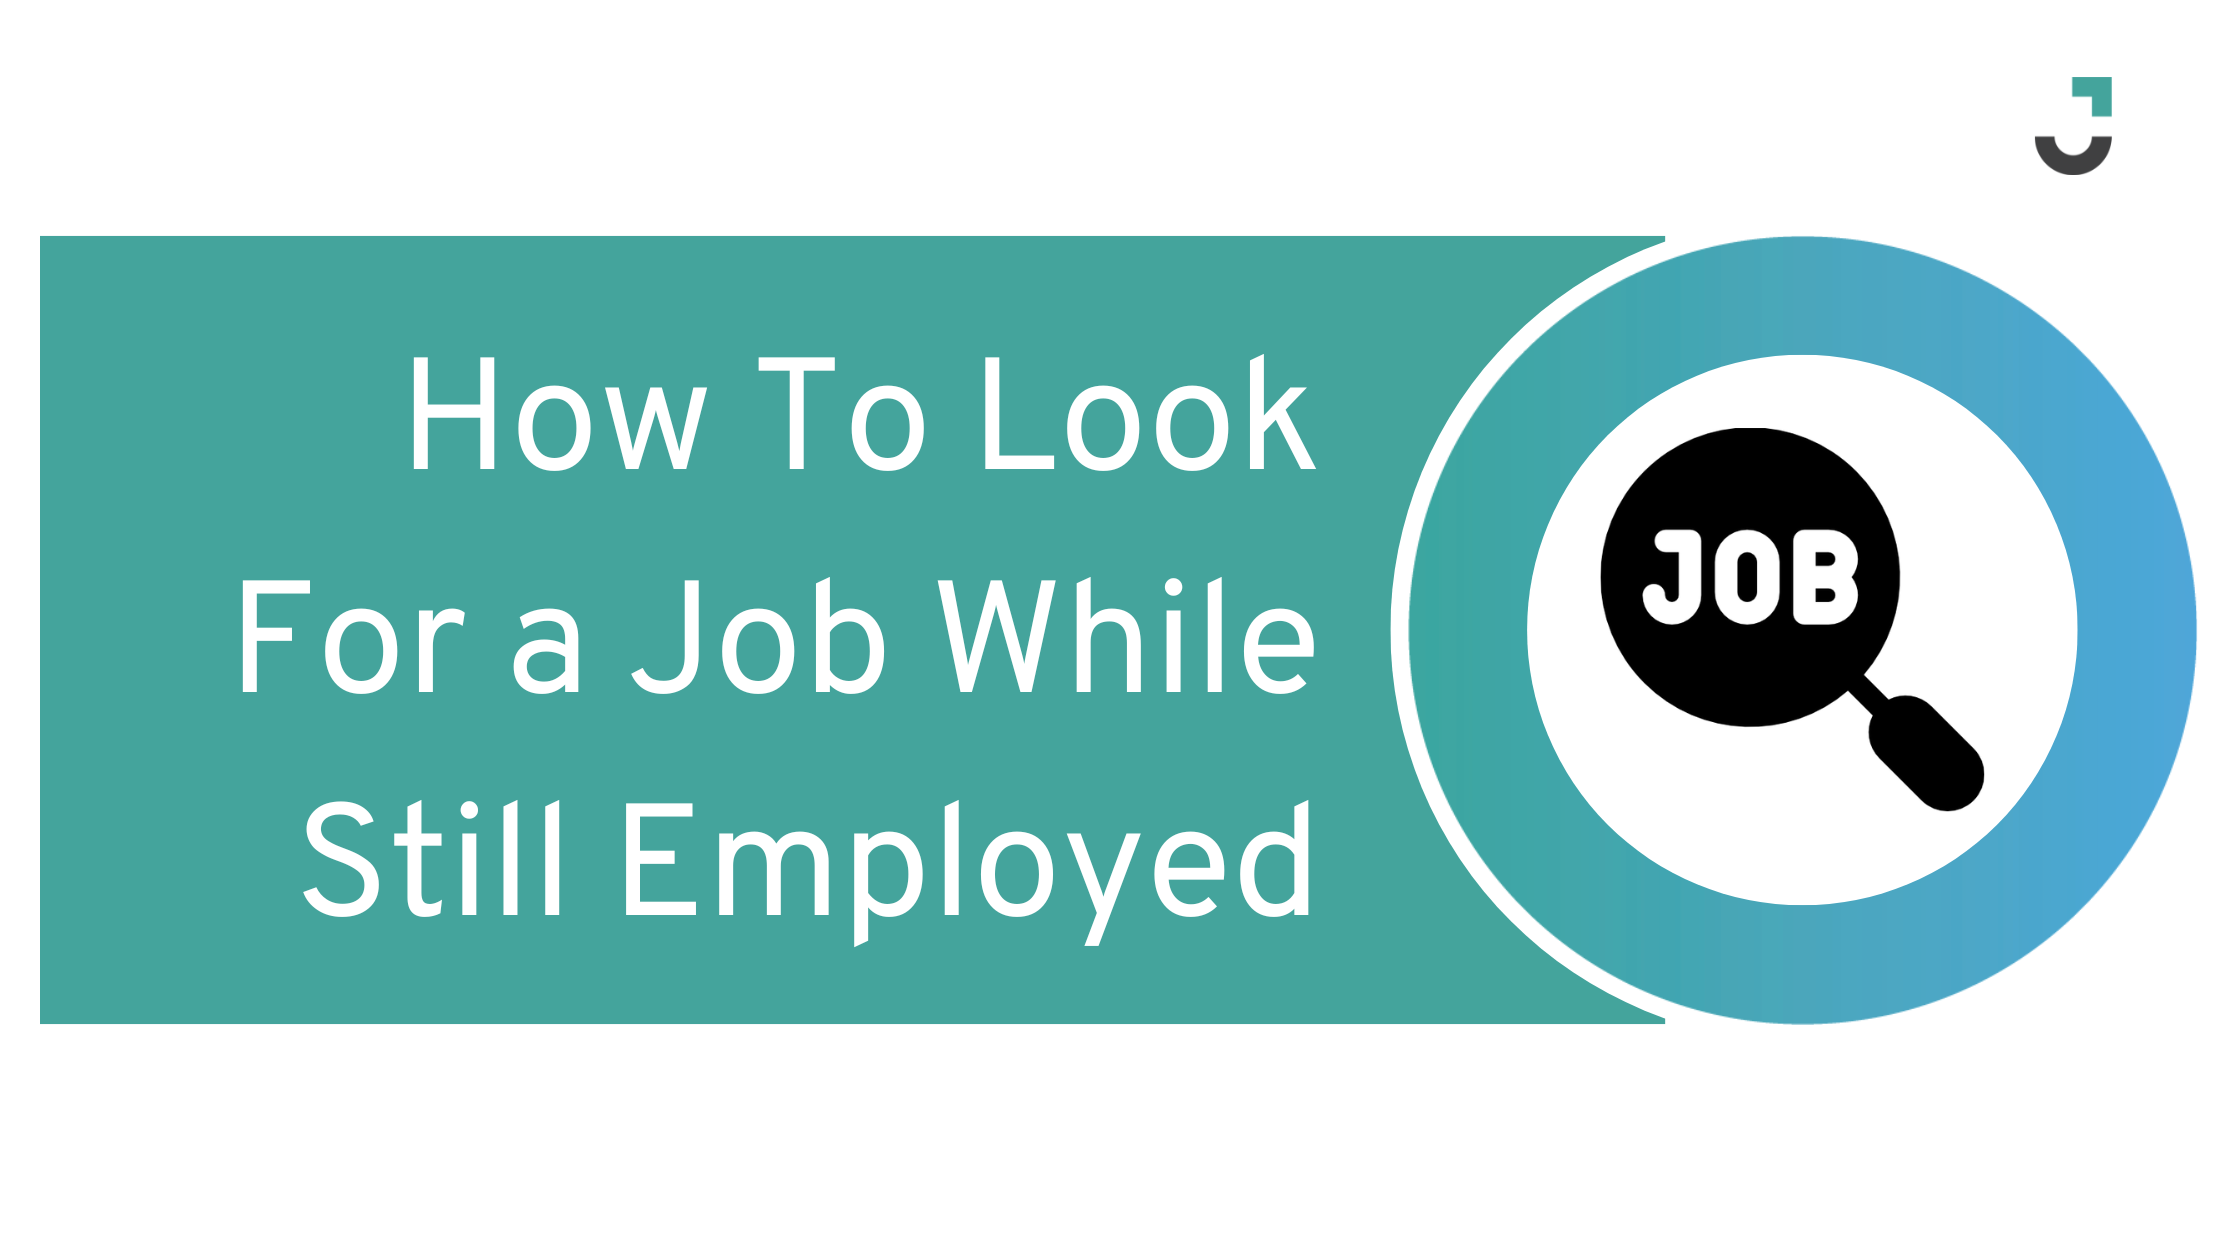 How To Look For a Job While Still Employed